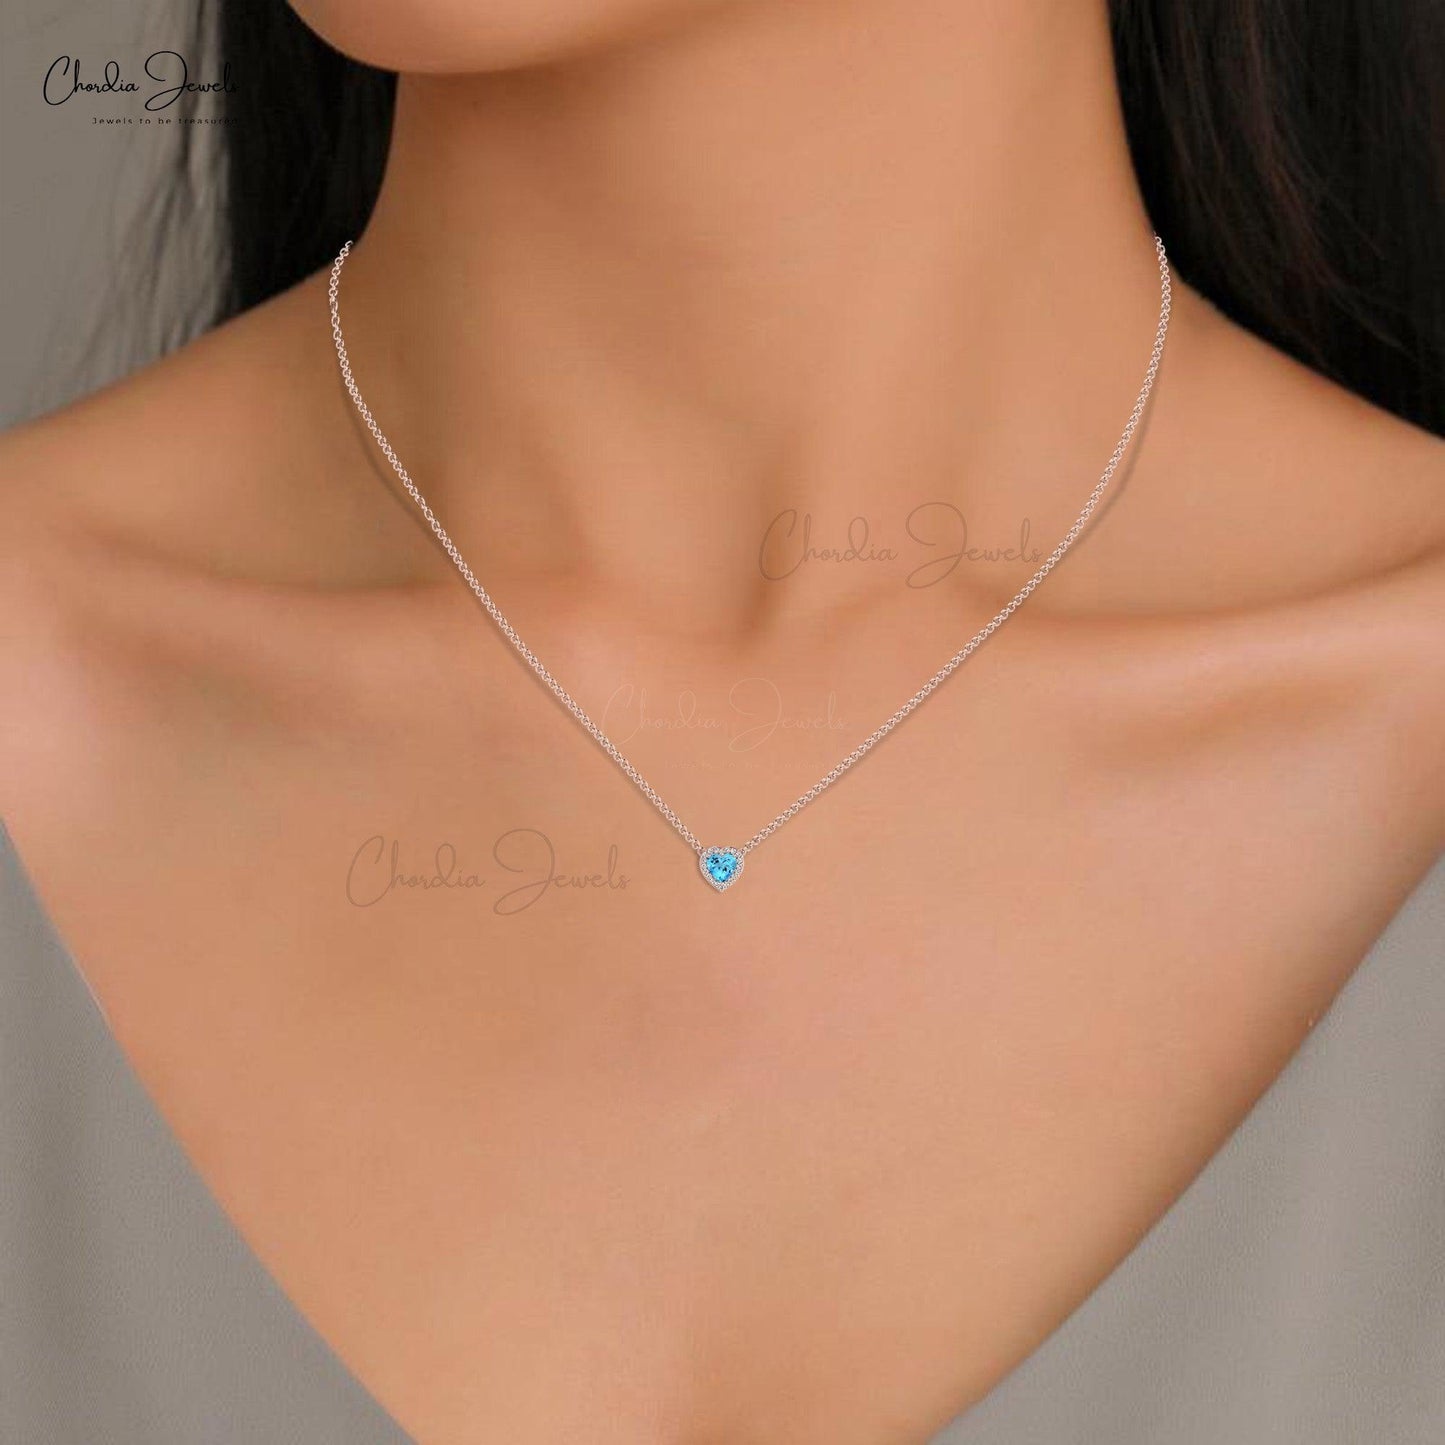 Solid 14k Gold Heart Shape Charm Necklace Natural 0.6ct Swiss Blue Topaz & Diamond Halo Necklace